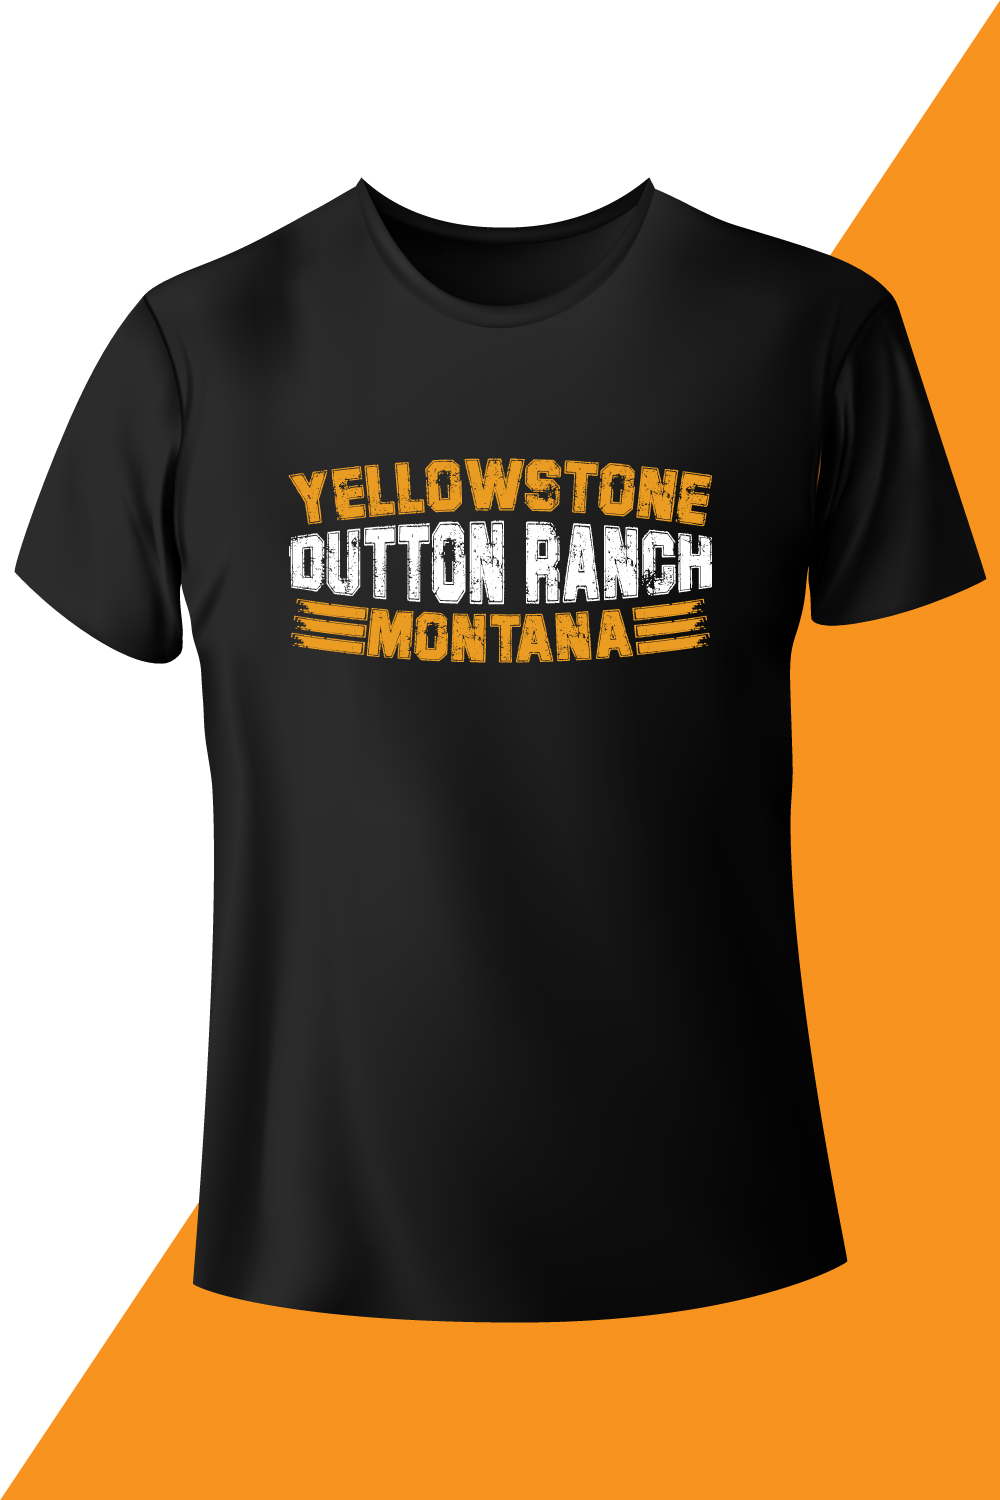 Image with black t-shirt with marvelous yellowstone dutton ranch montana lettering.